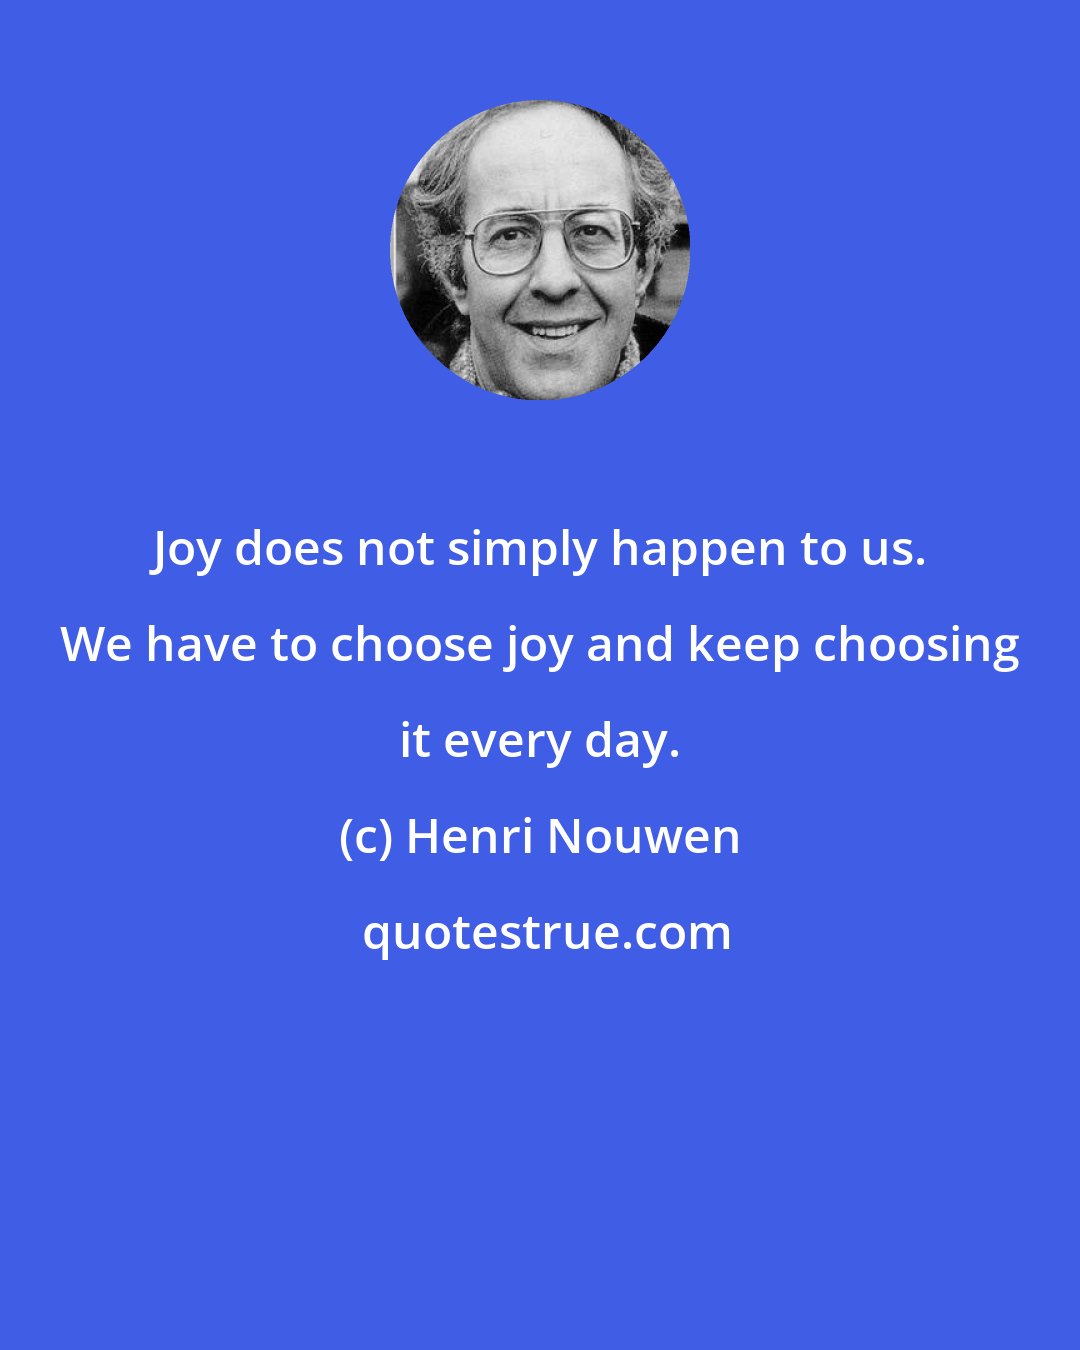 Henri Nouwen: Joy does not simply happen to us. We have to choose joy and keep choosing it every day.